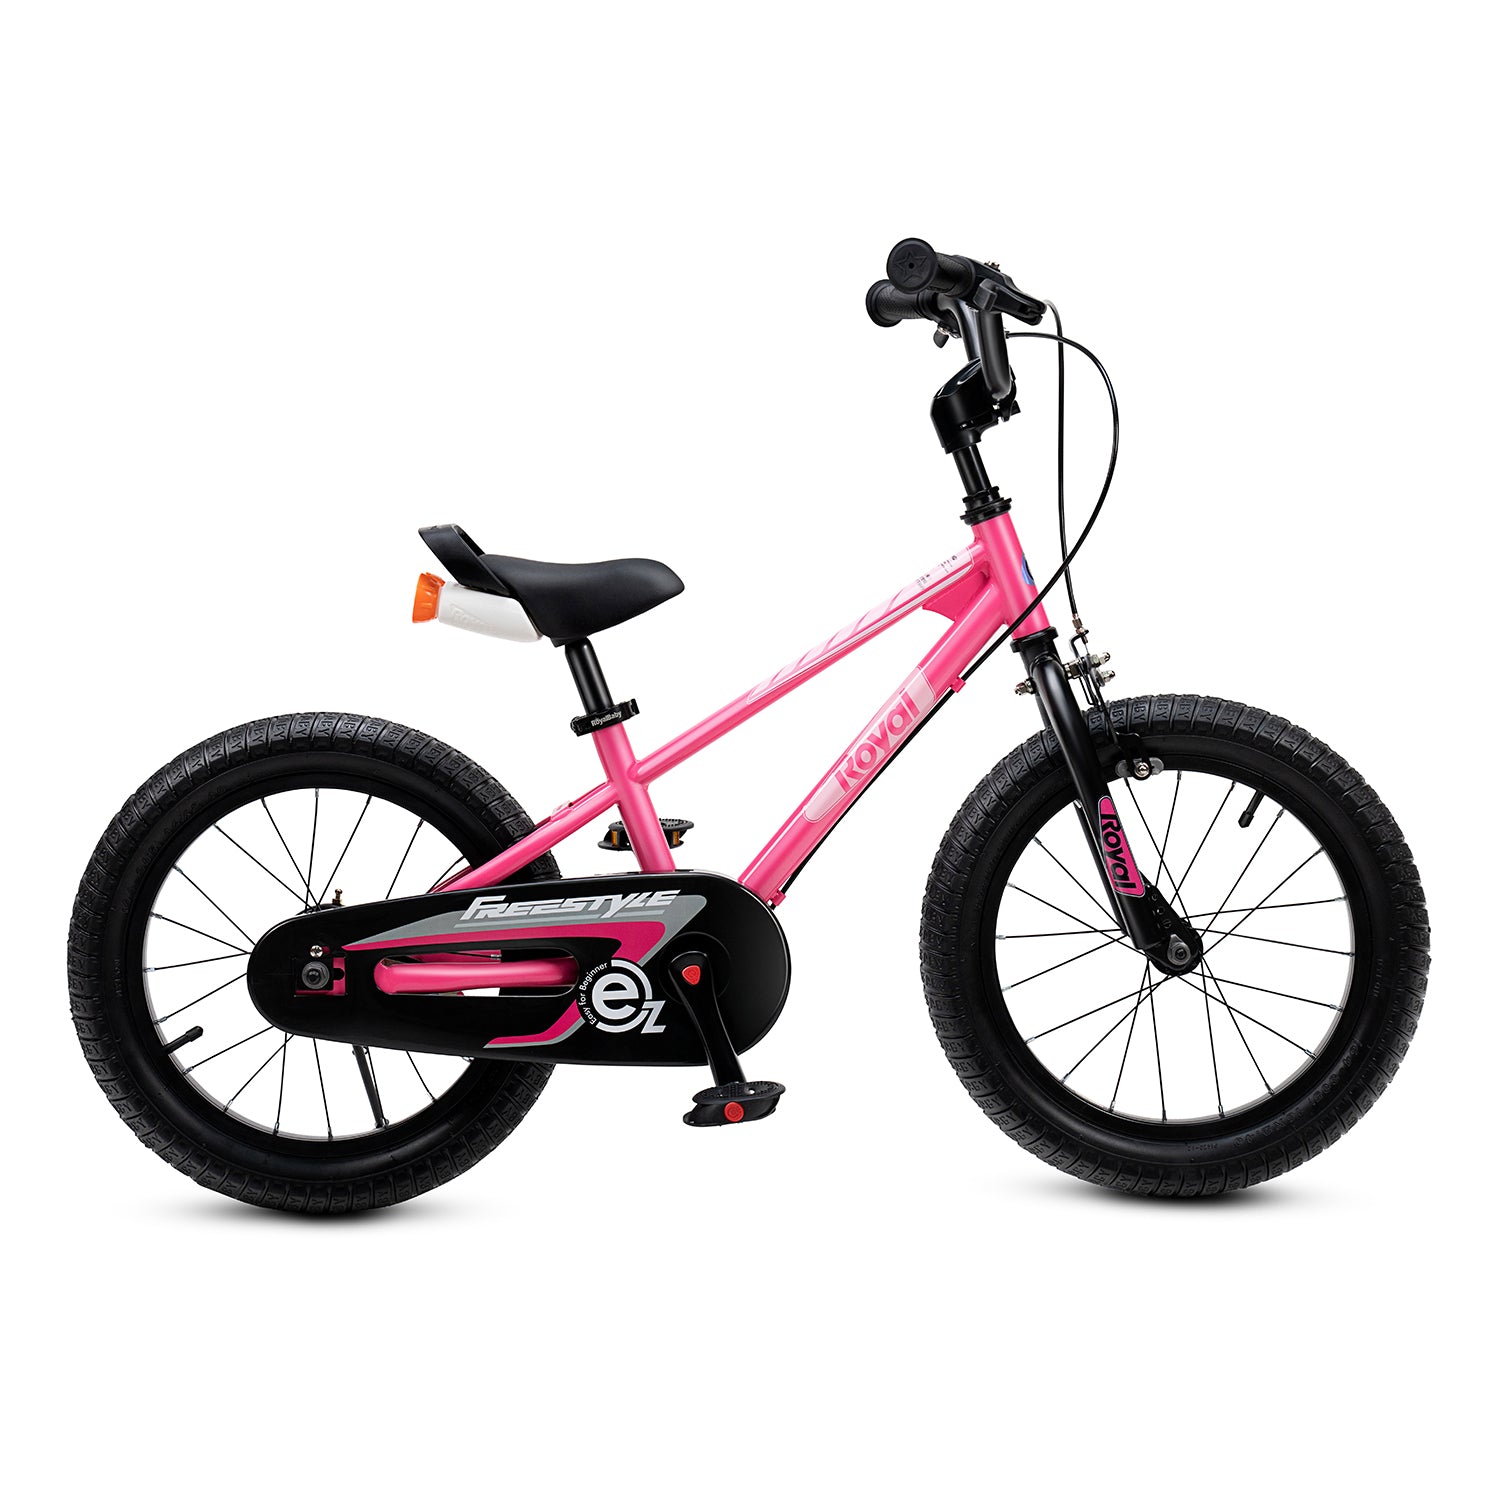 RoyalBaby EZ Kids Bike Easy Learn Balancing to Biking Balance & Pedal Bicycle Instant Assembly for Boys Girls Ages 2-9 Years Multiple Color